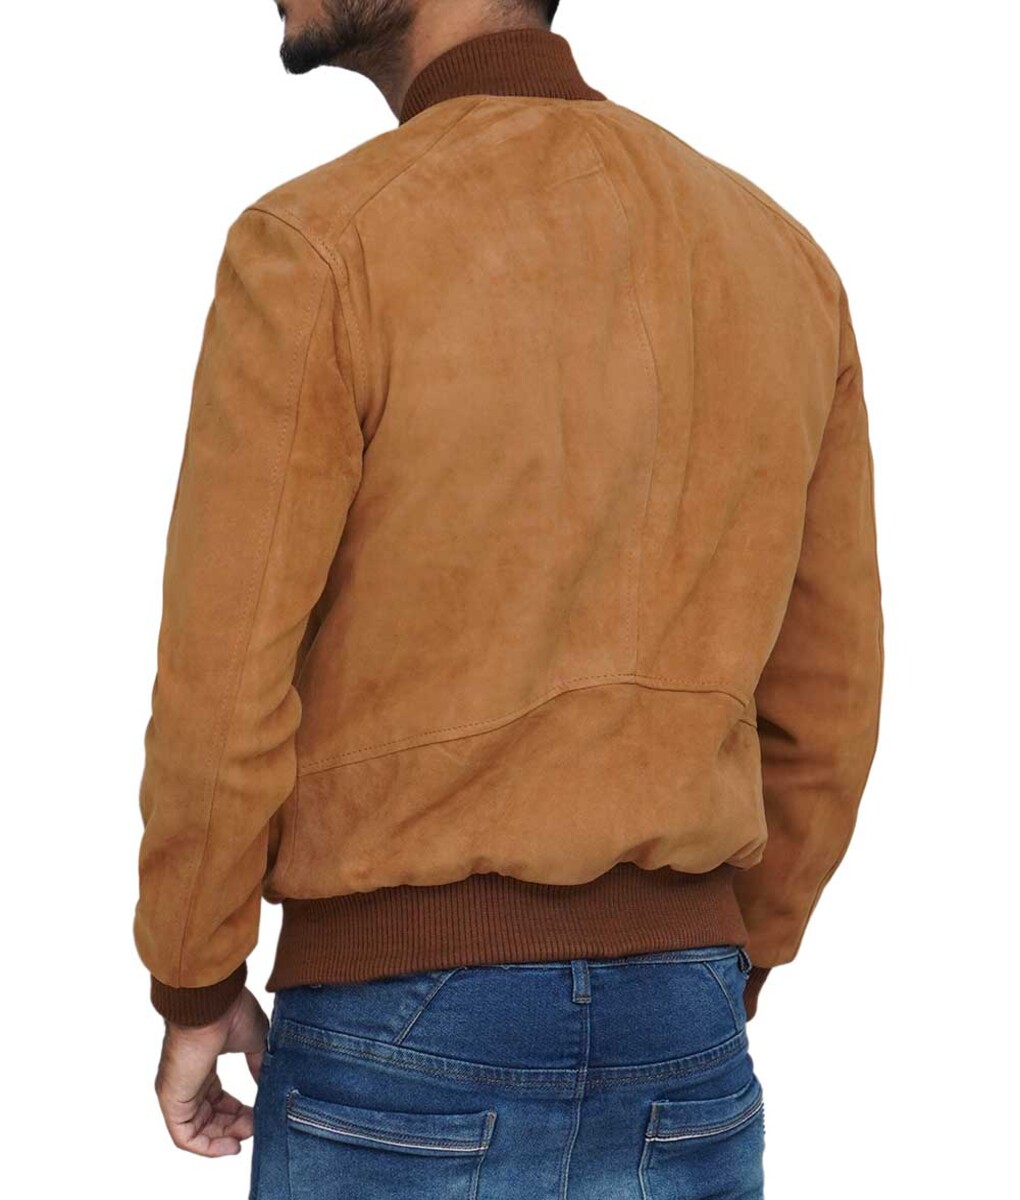 Camel_Brown_Suede_Leather_jacket